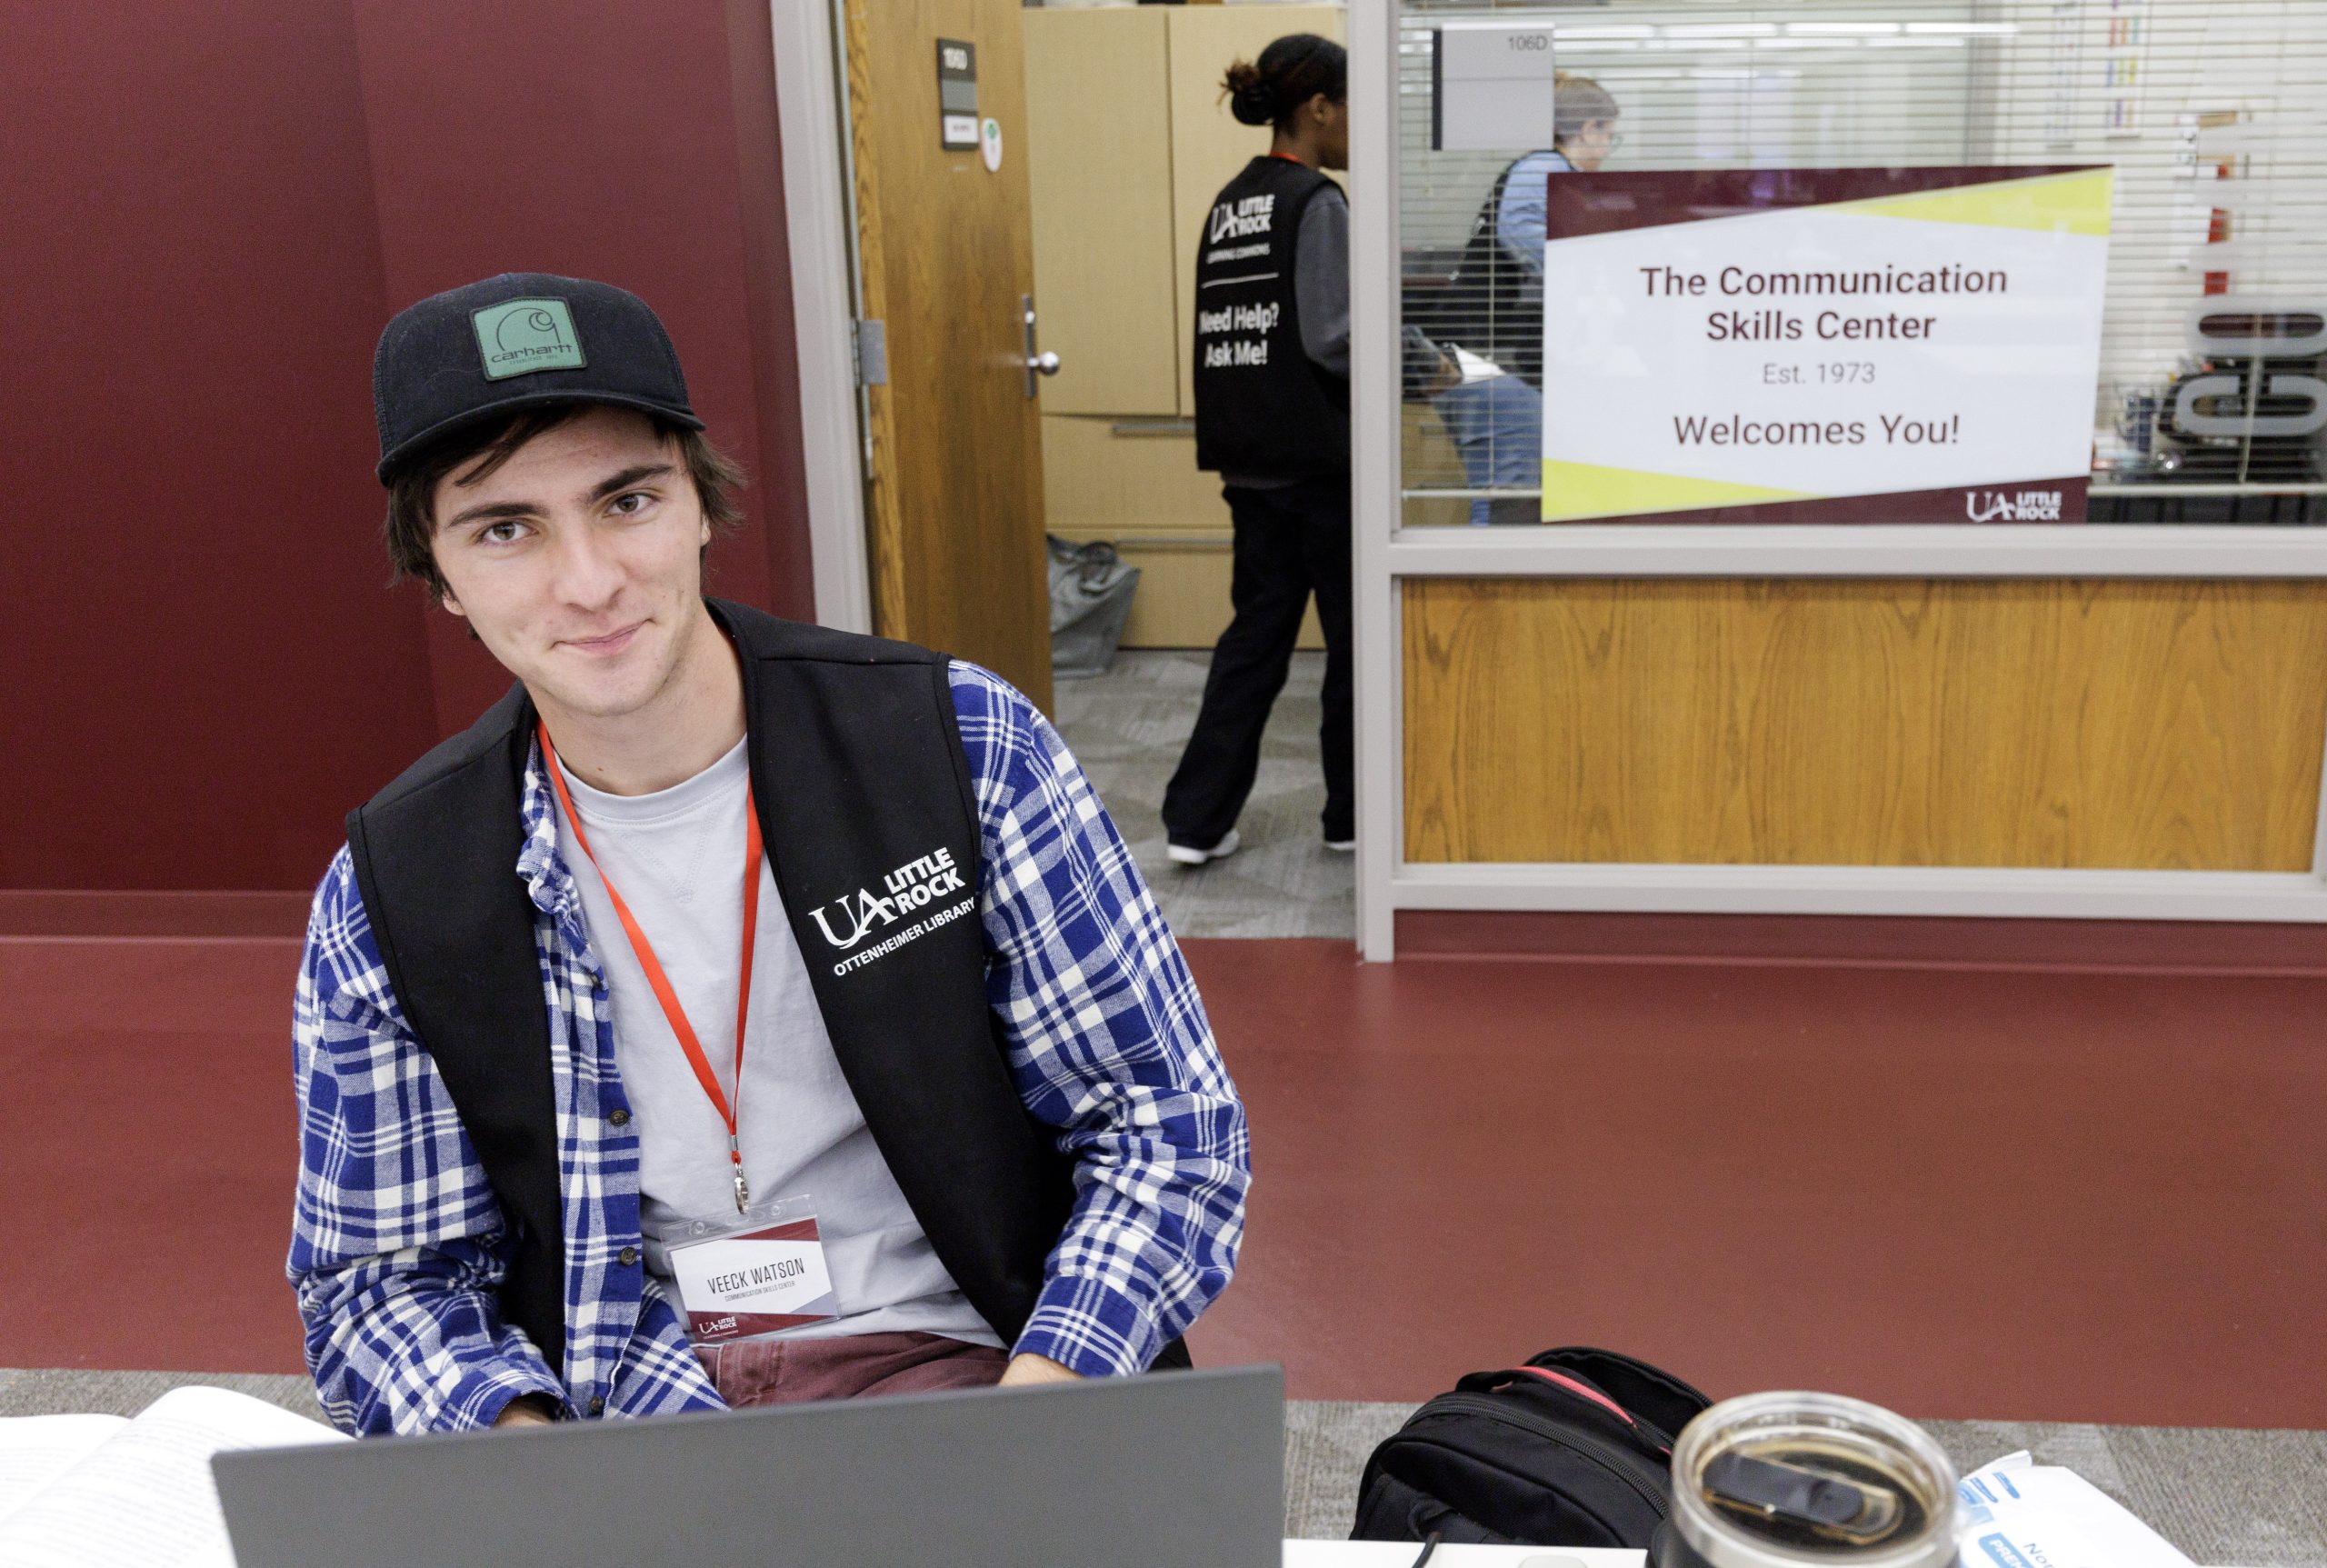 A student sits at a desk wearing a vest that notes he is a tutor. Behind him is a sign that reads "The Communication Skills Center, est. 1973."